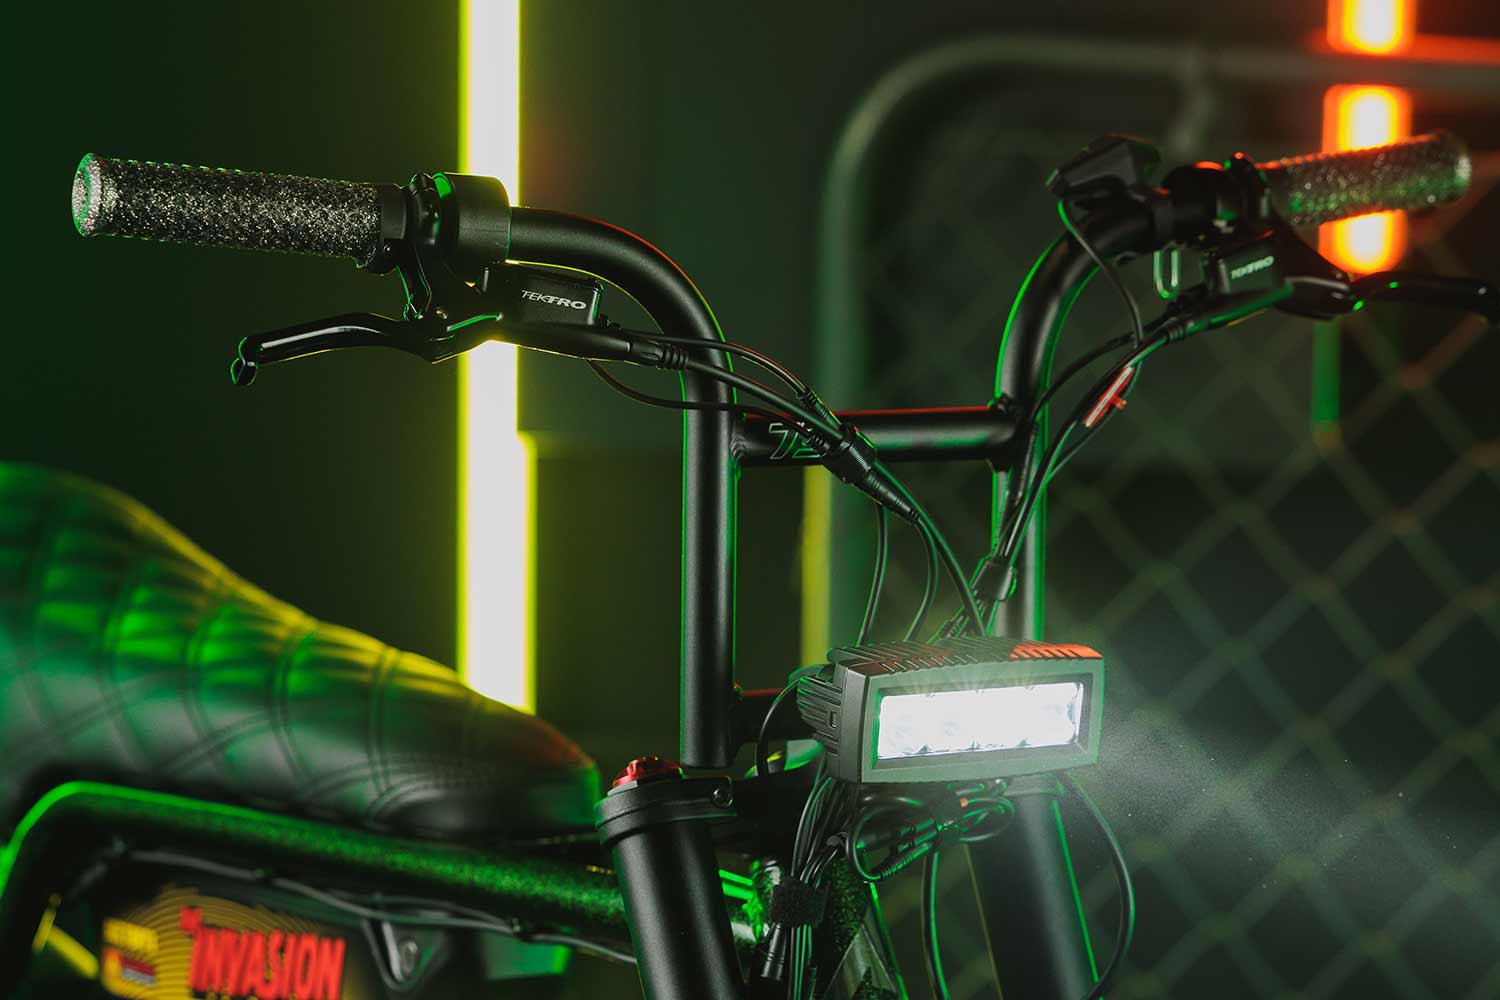 Closeup image of the SECTOR73 ZX First Contact bike handlebars and OG light bar.